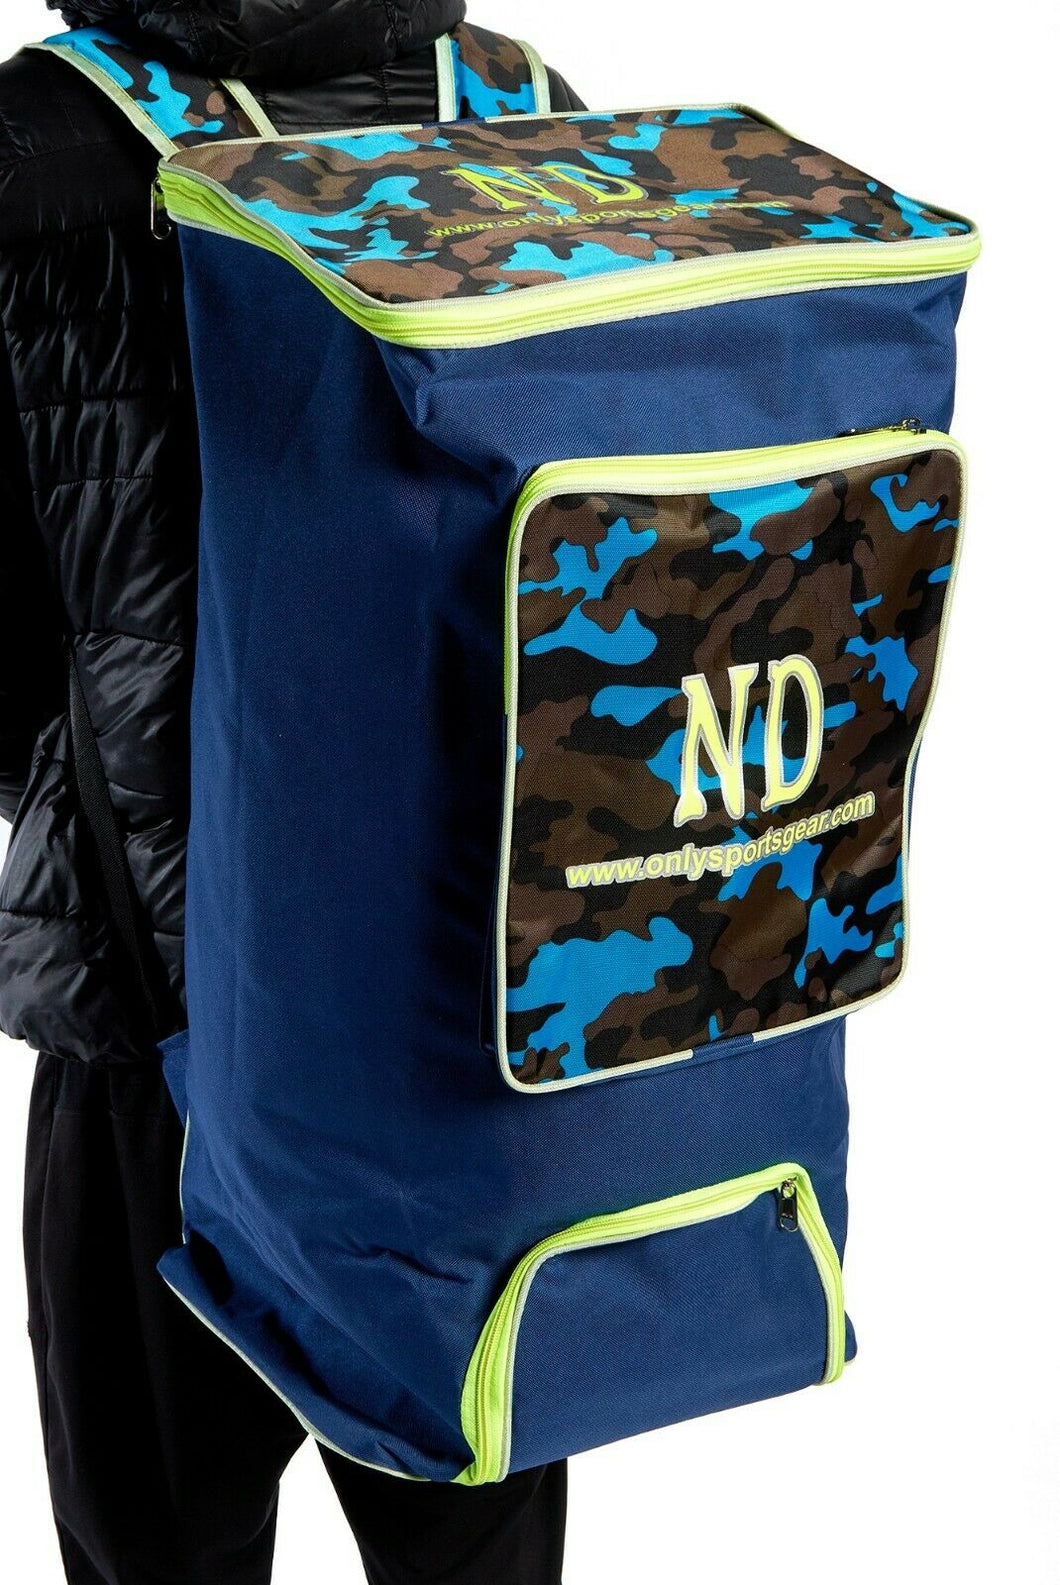 ND Plus Camouflage Powerbow Large Duffle Kit Cricket Bag 70 x 30 x 35 cm